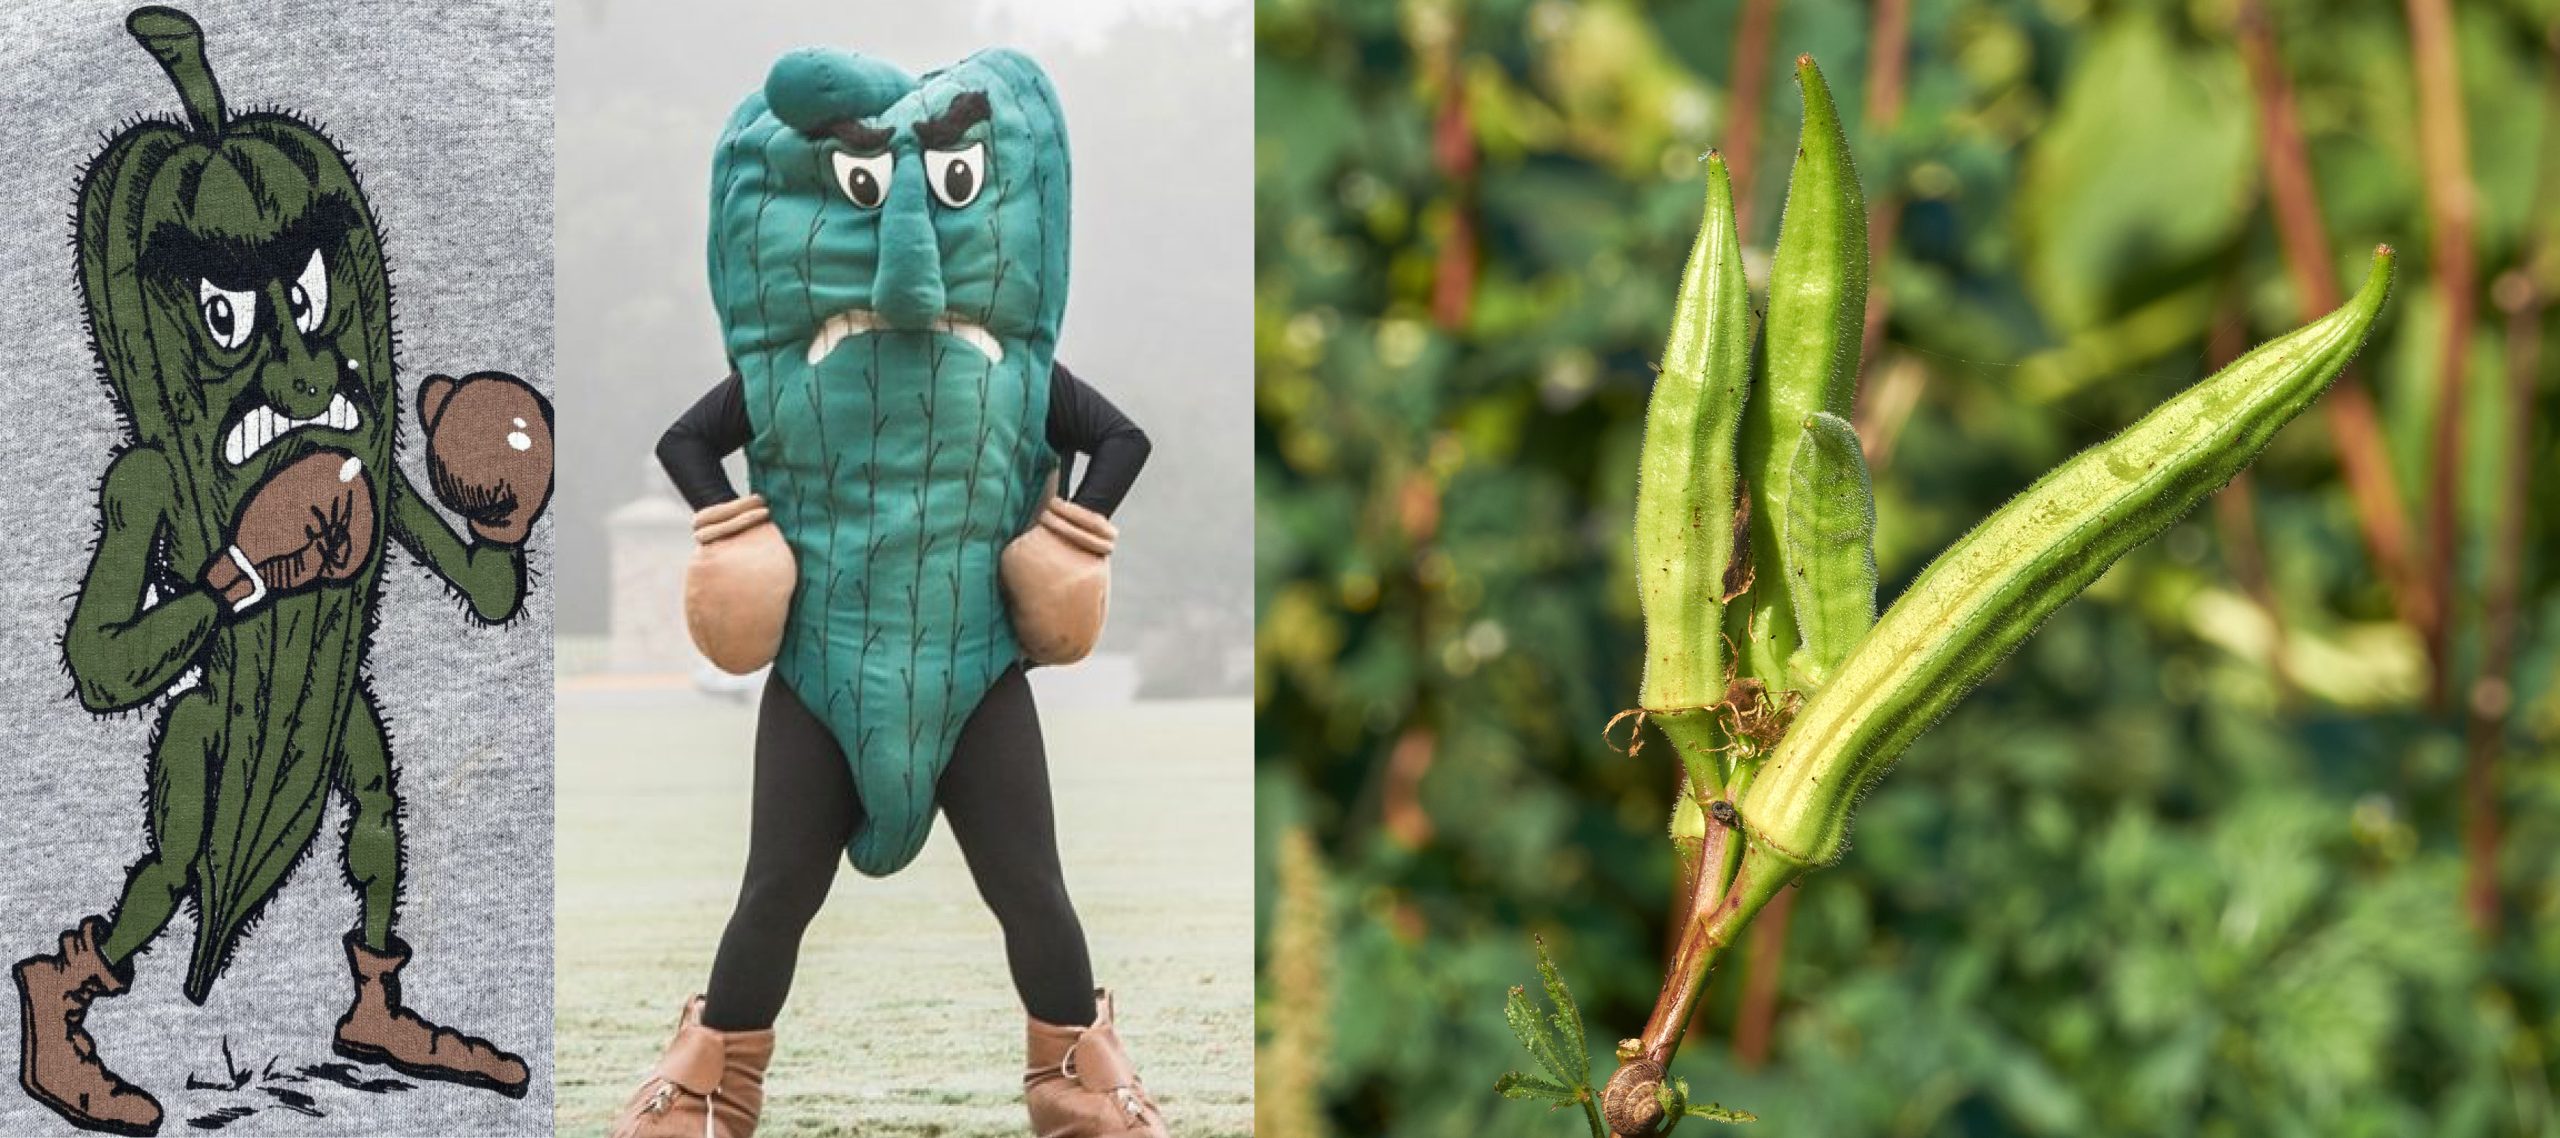 Delta State University's unofficial mascot, the fighting okra. Right: Okra pods (Abelmoschus esculentus).